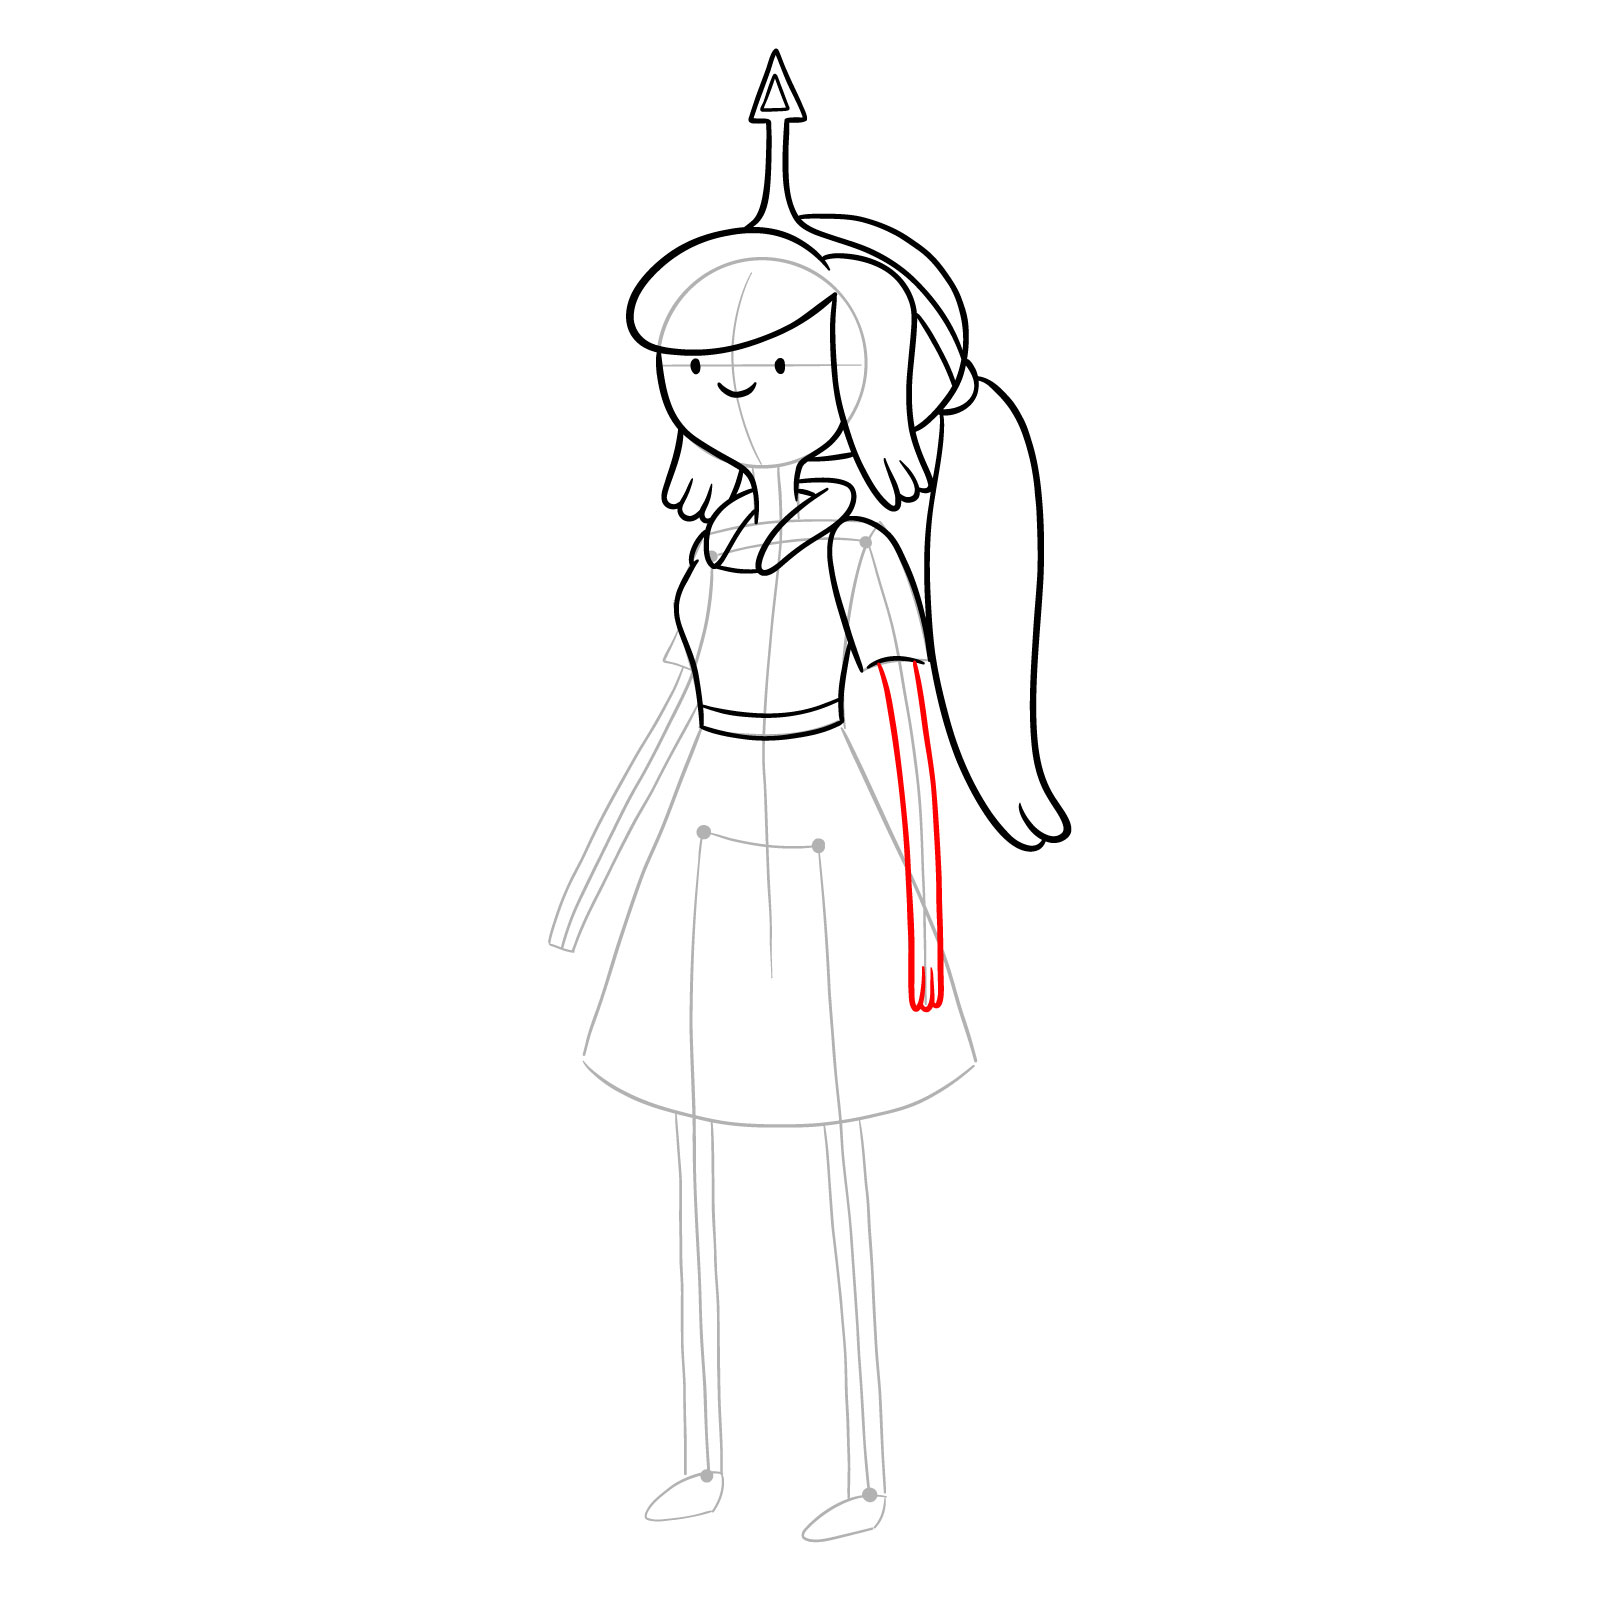 How to draw Princess Chewypaste from Adventure Time - step 16